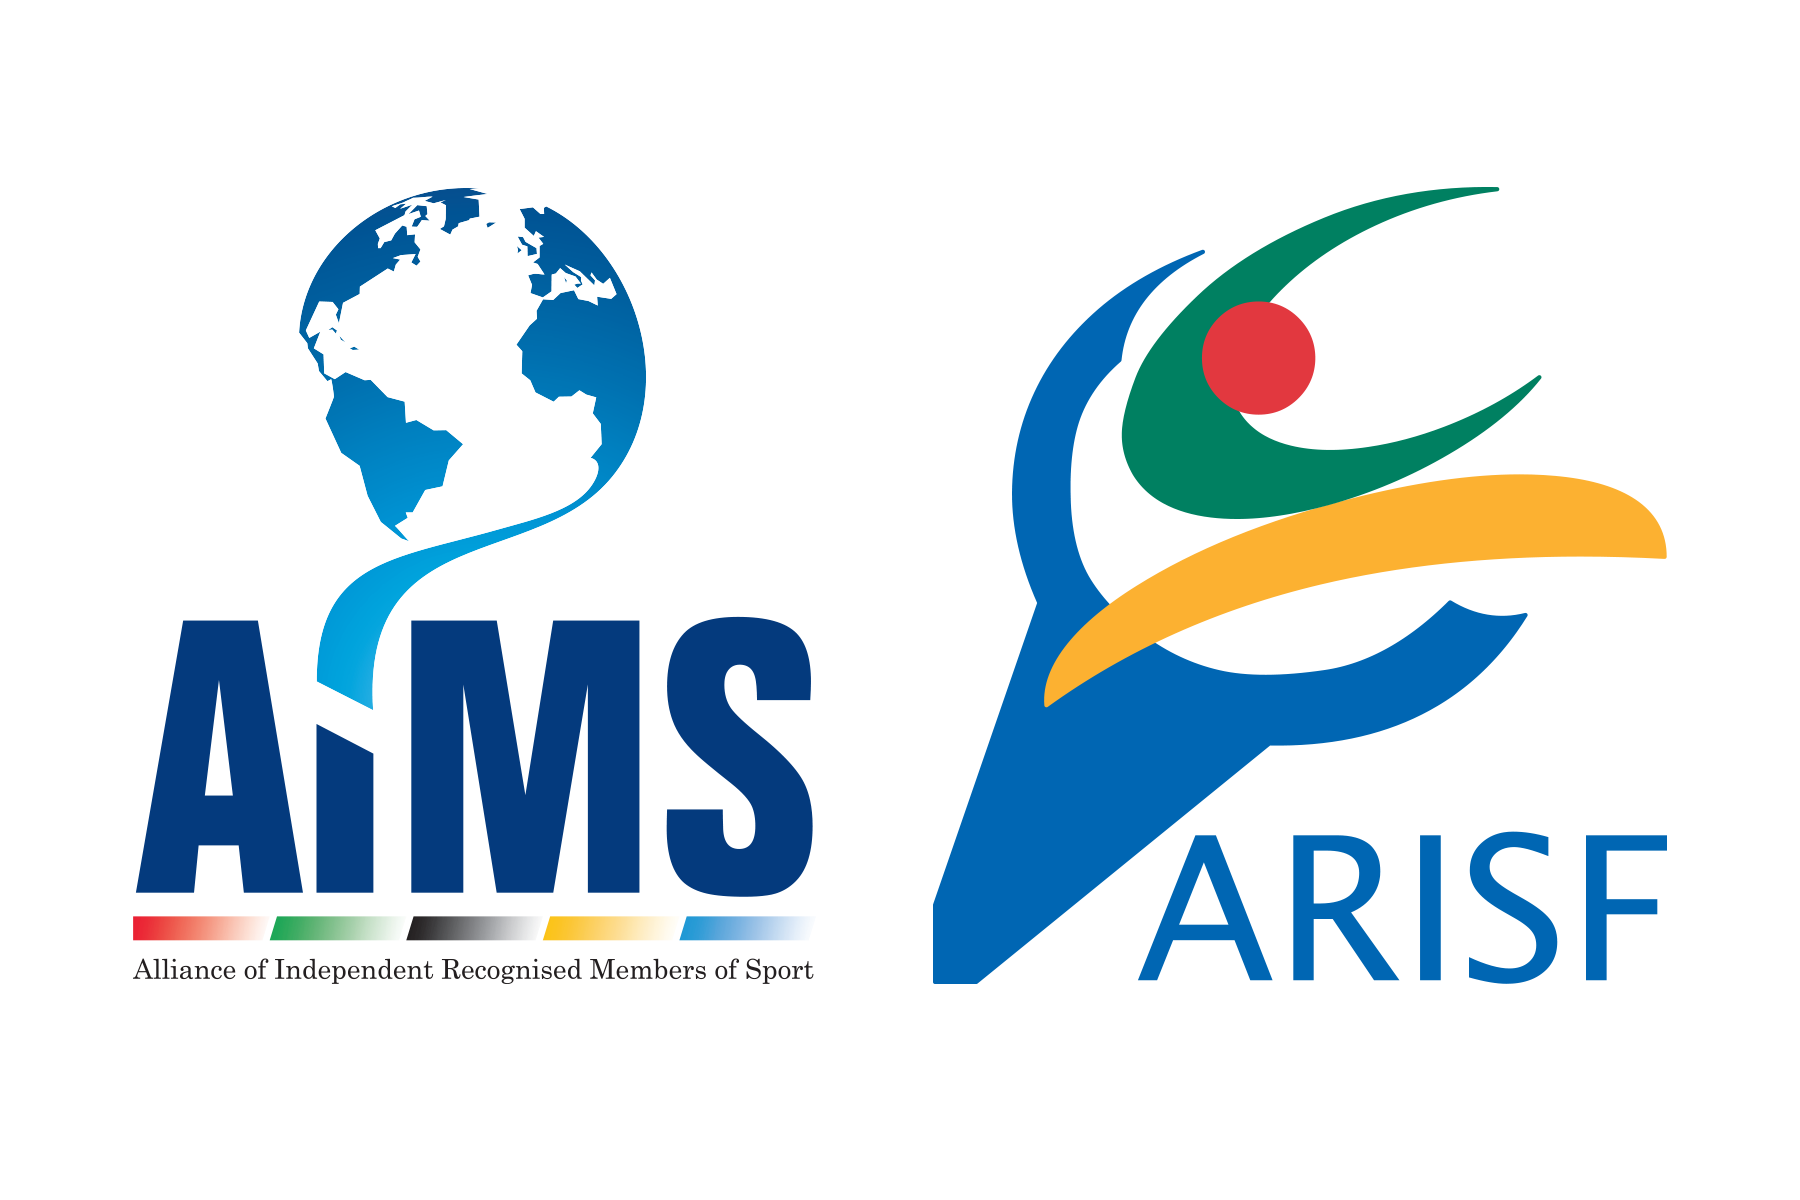 AIMS and ARISF Welcome Dinner